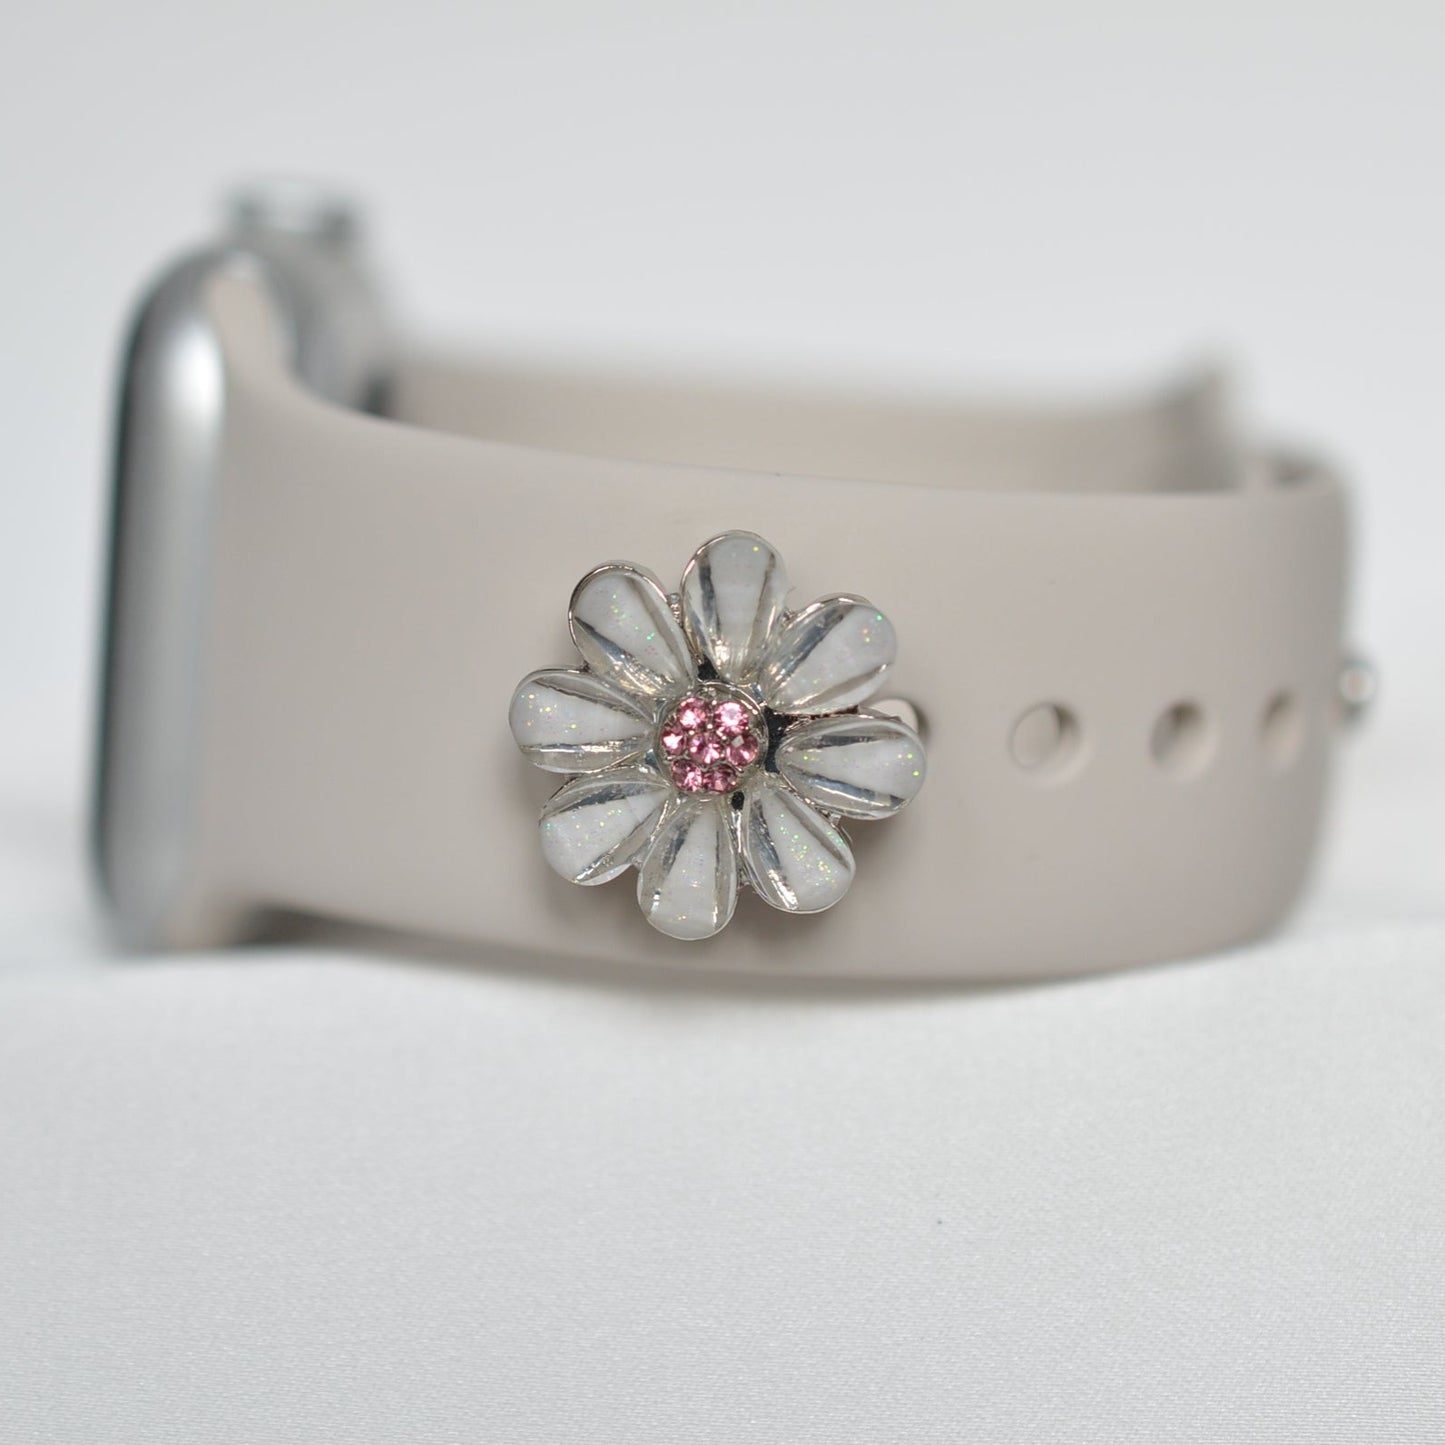 Pink Petal Flower Stone Charm for belts, bags and watch bands